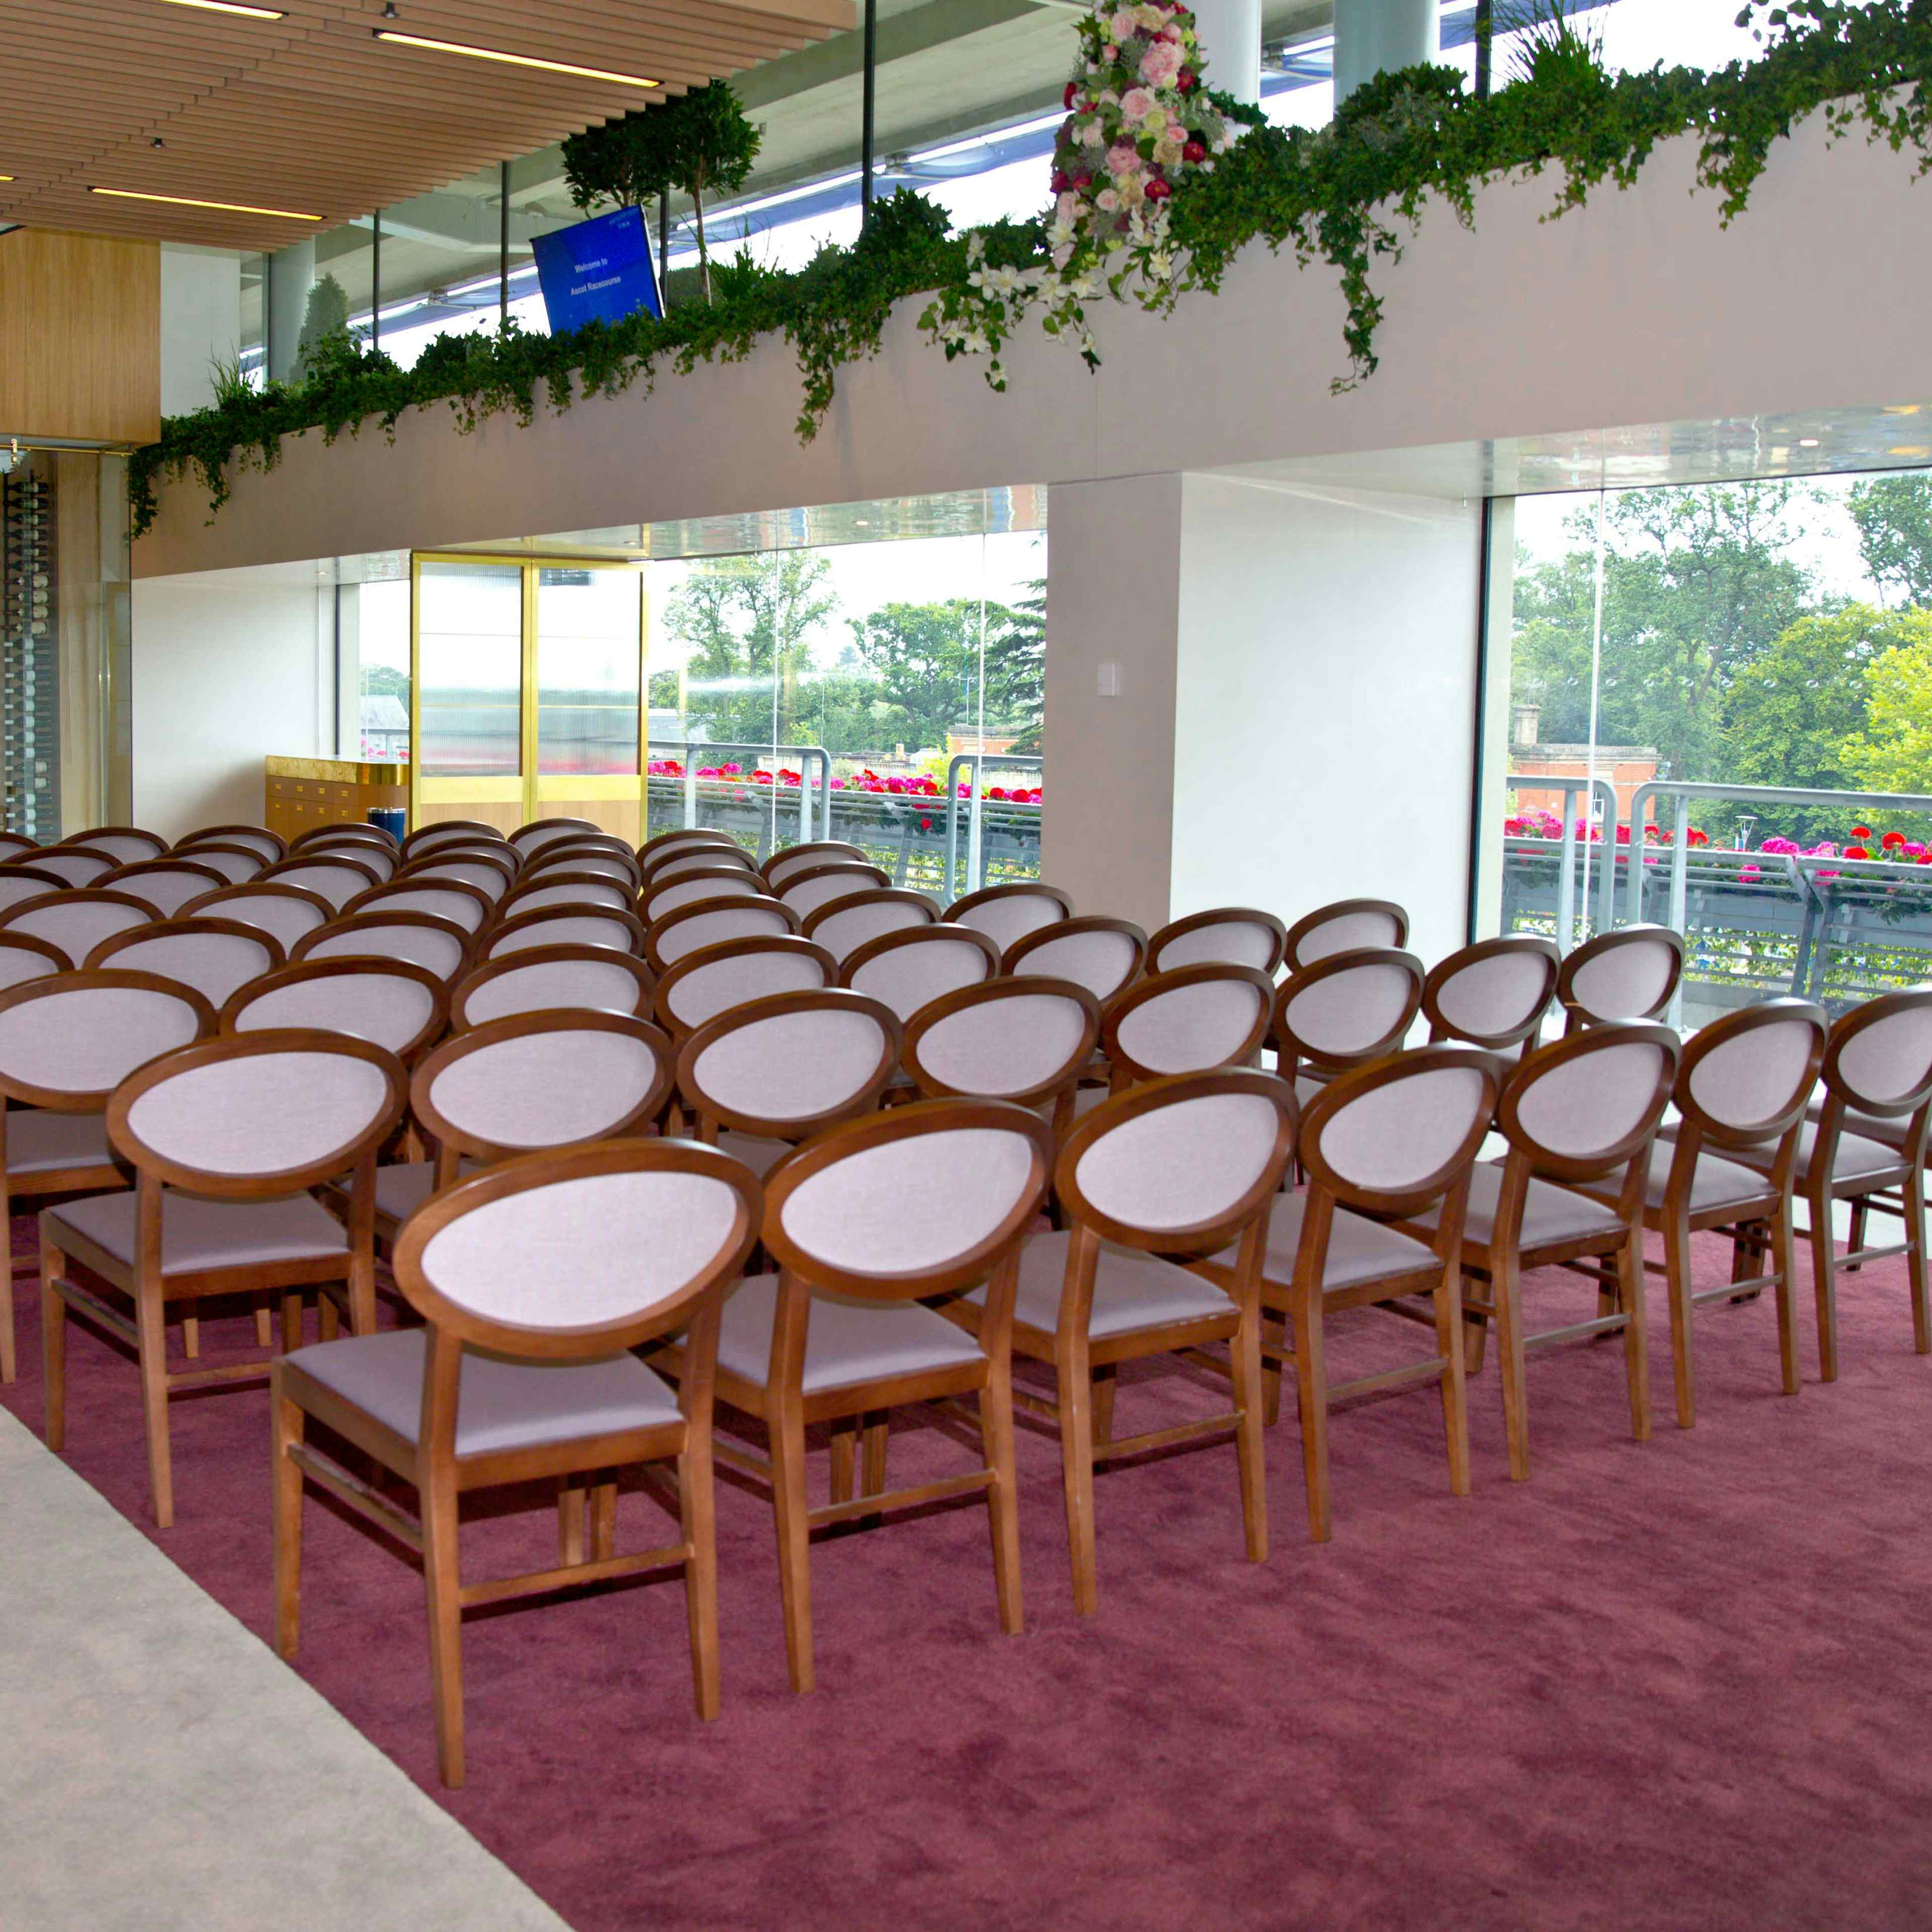 Ascot Racecourse - Parade Ring Suite image 3